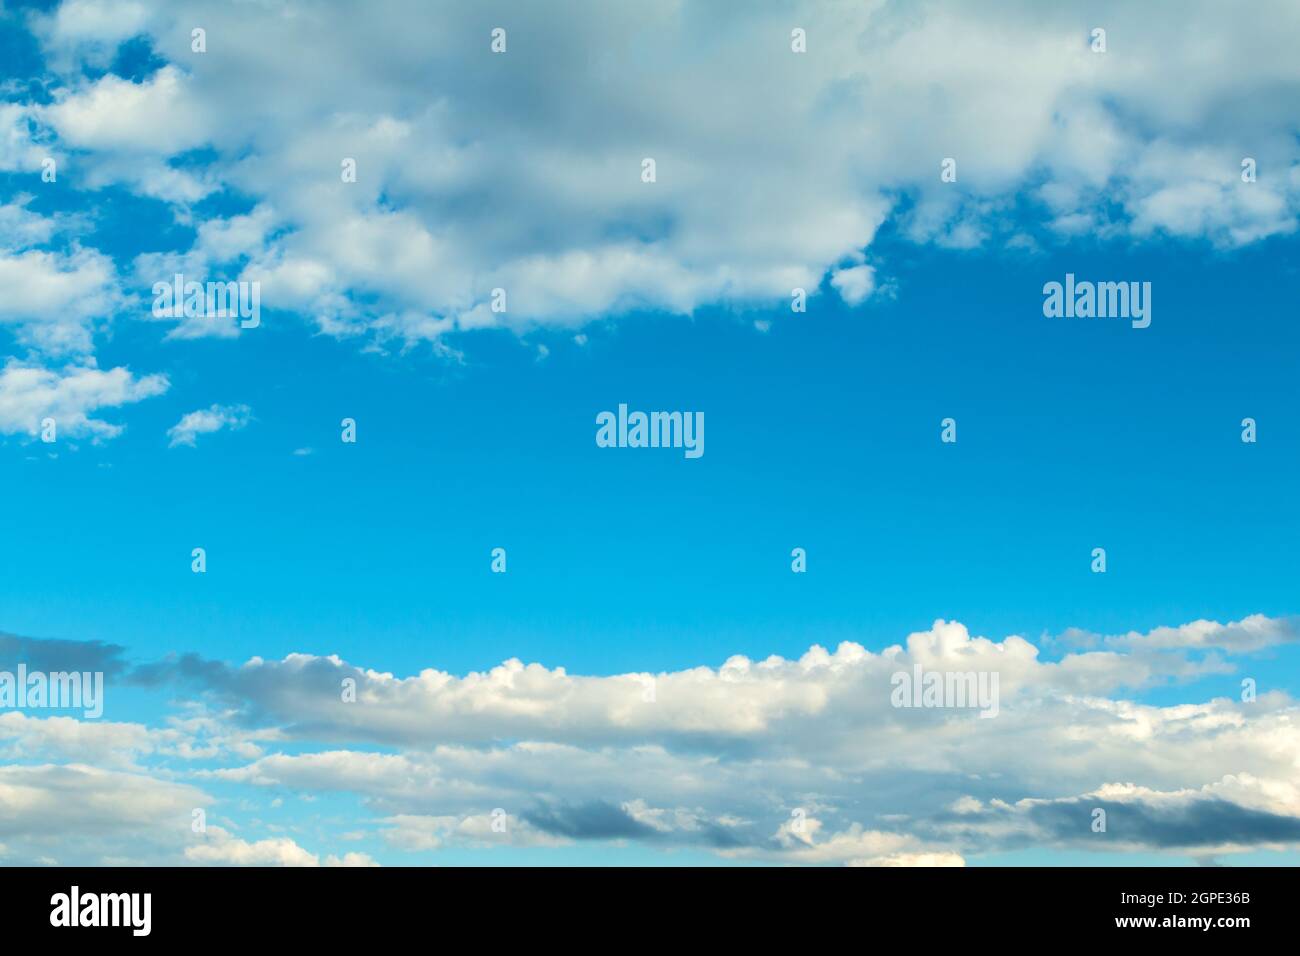 Fluffy clouds decorating a beautirful blue sky Stock Photo